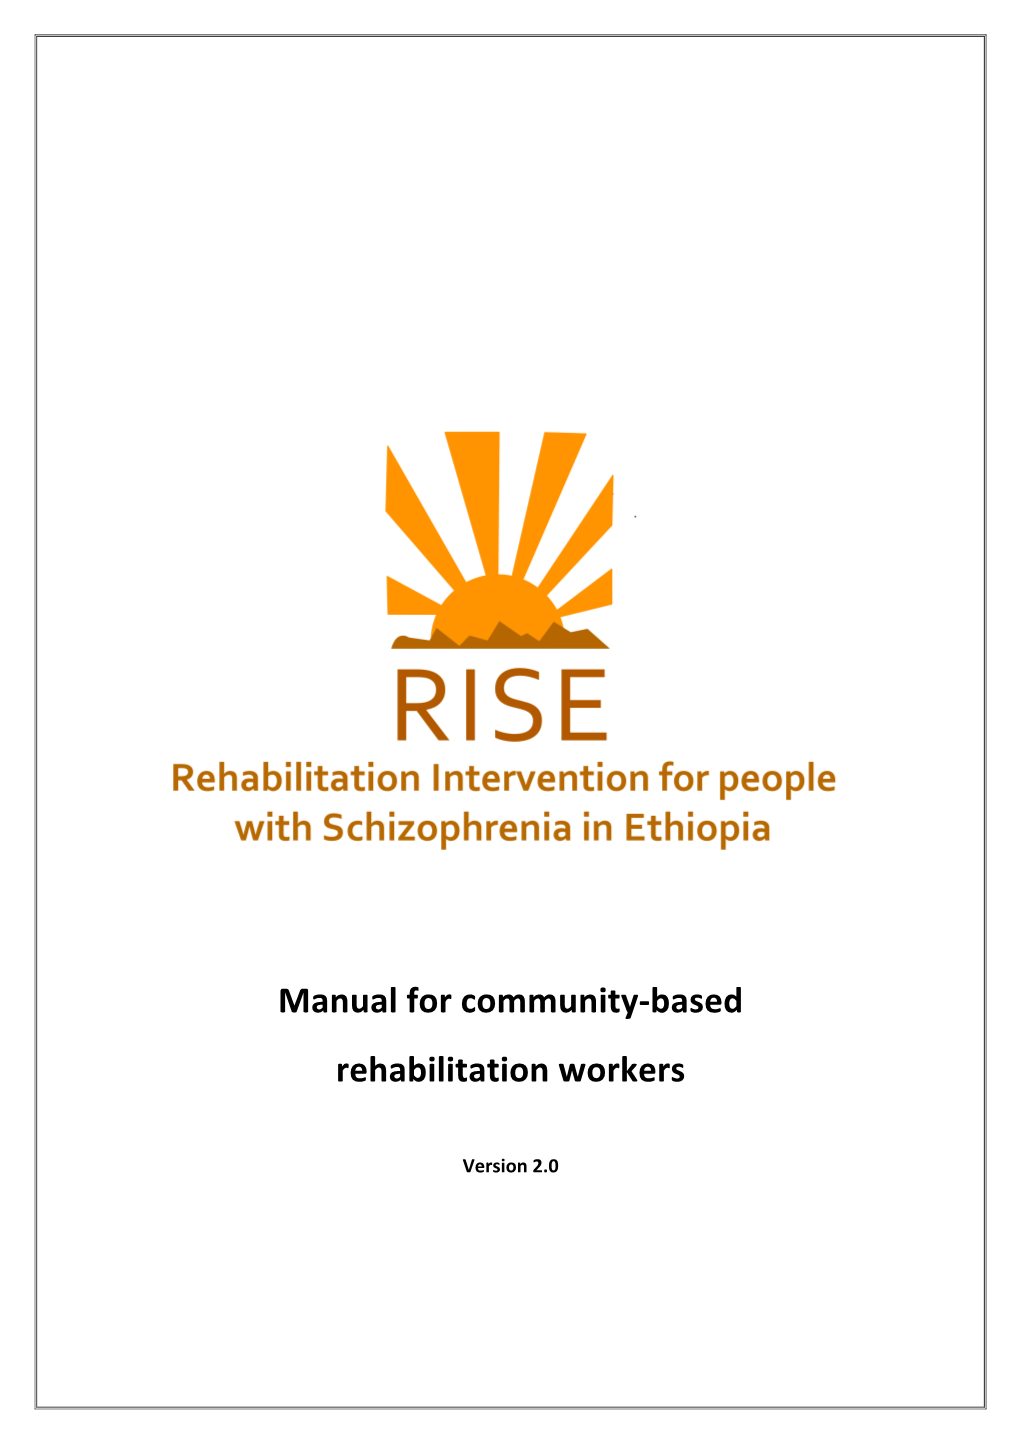 Manual for Community-Based Rehabilitation Workers